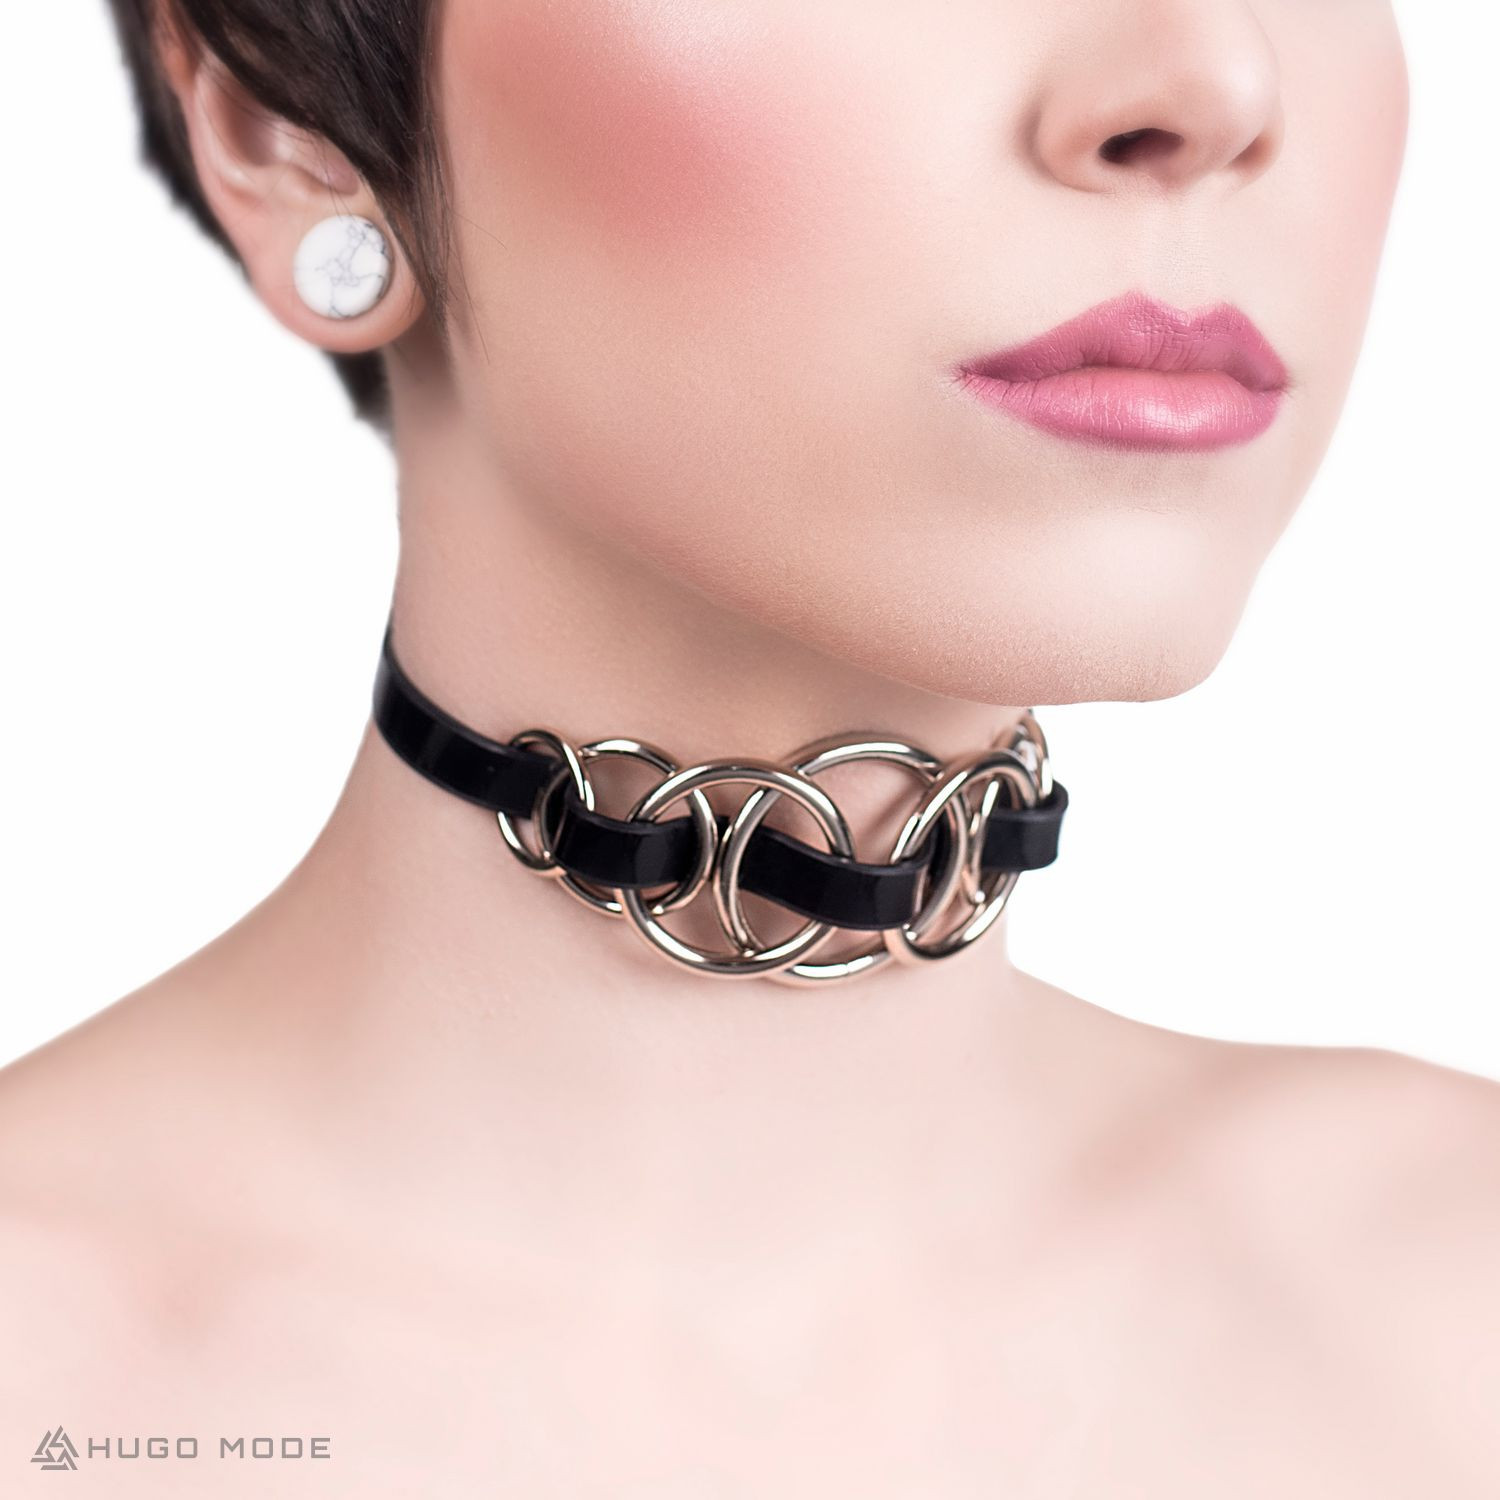 A thin choker necklace decorated with intertwined rings.